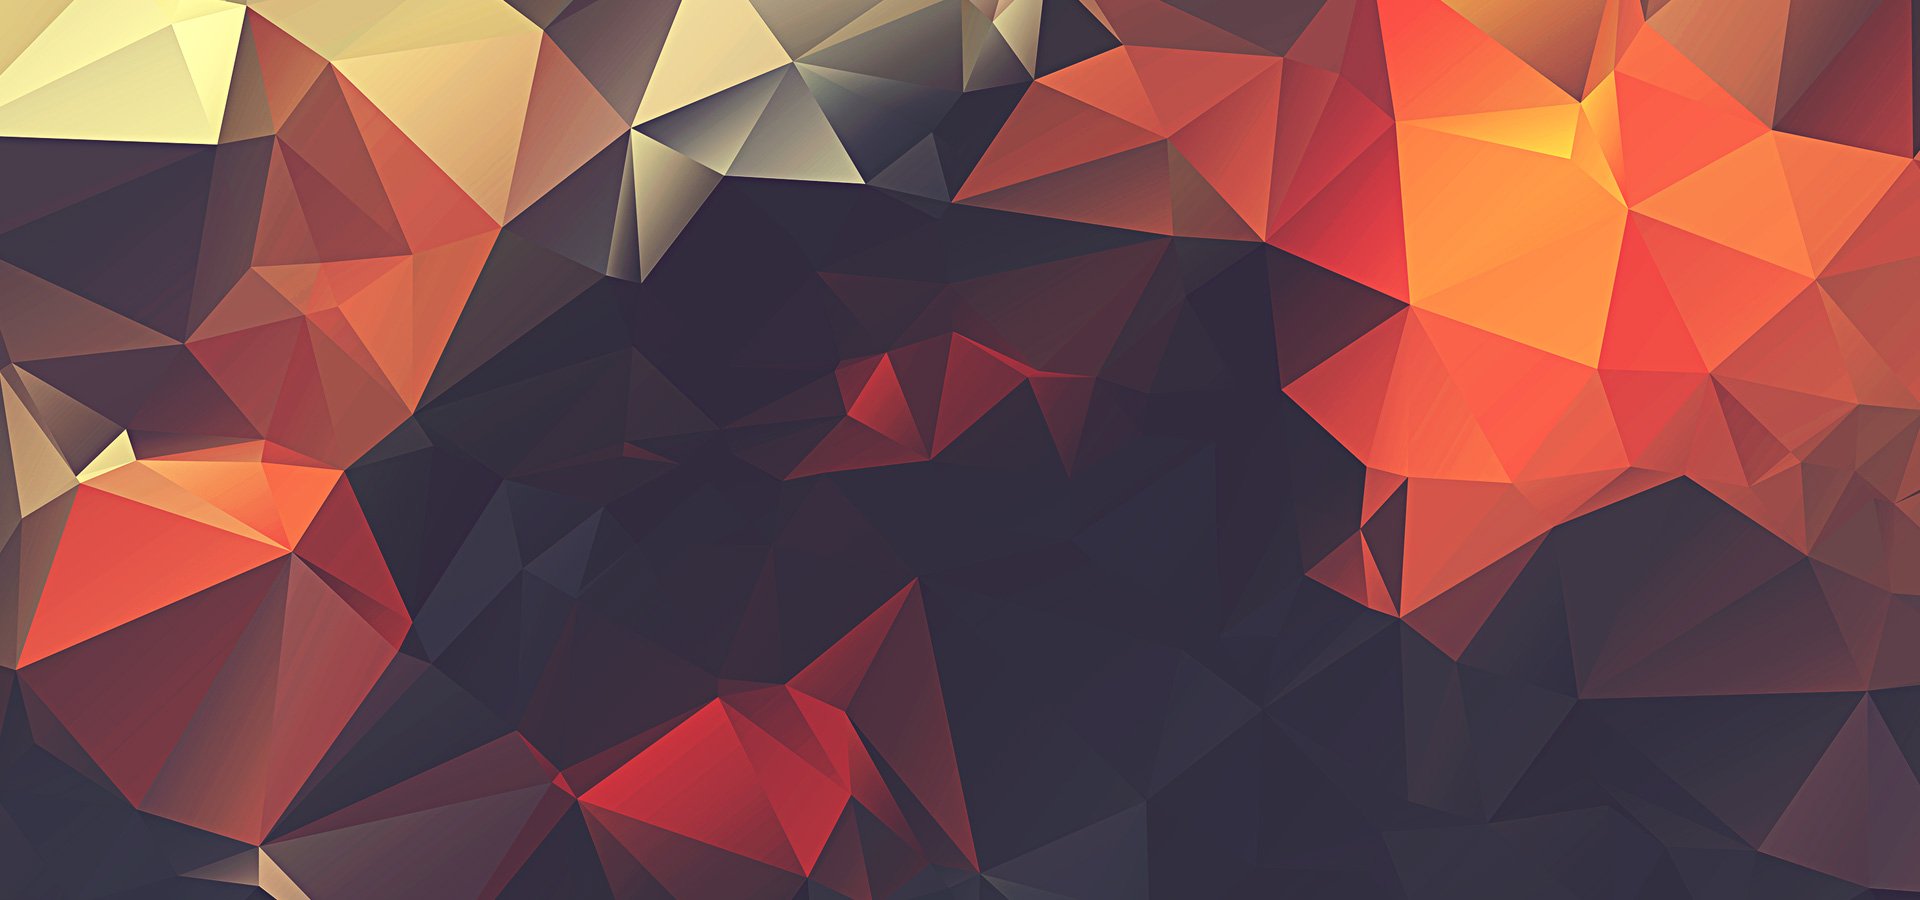 20+ Polygon Backgrounds